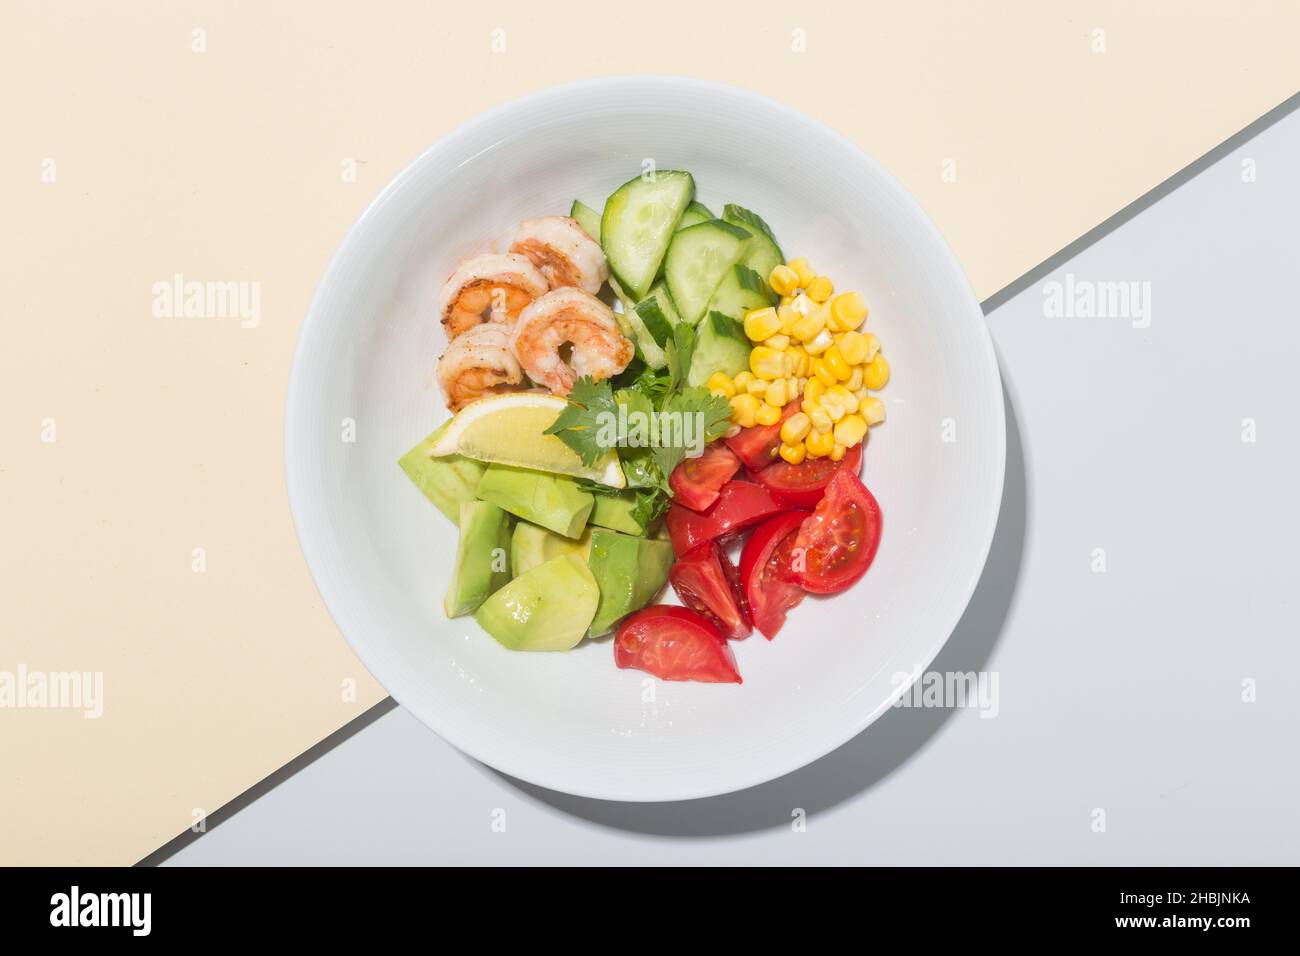 Fresh Avocado, shrimps salad with lettuce green mix, cherry tomatoes, herbs and olive oil, lemon dressing. healthy food Stock Photo